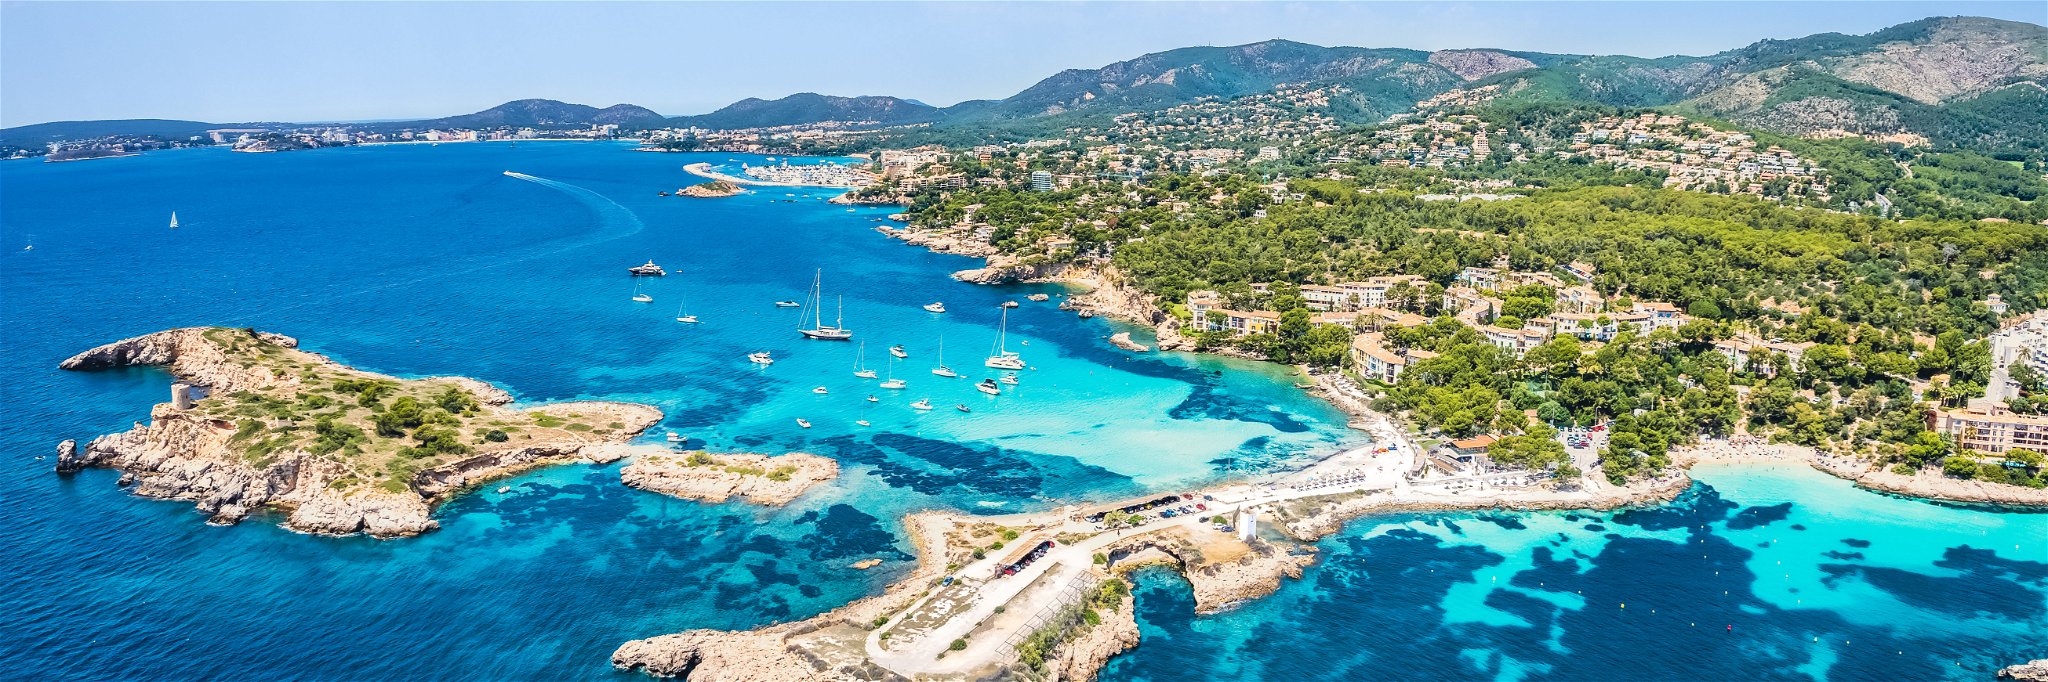 Dreamy beaches like Cala Xinxell in the southwest of&nbsp;Majorca aren't the only drawcard for travellers.